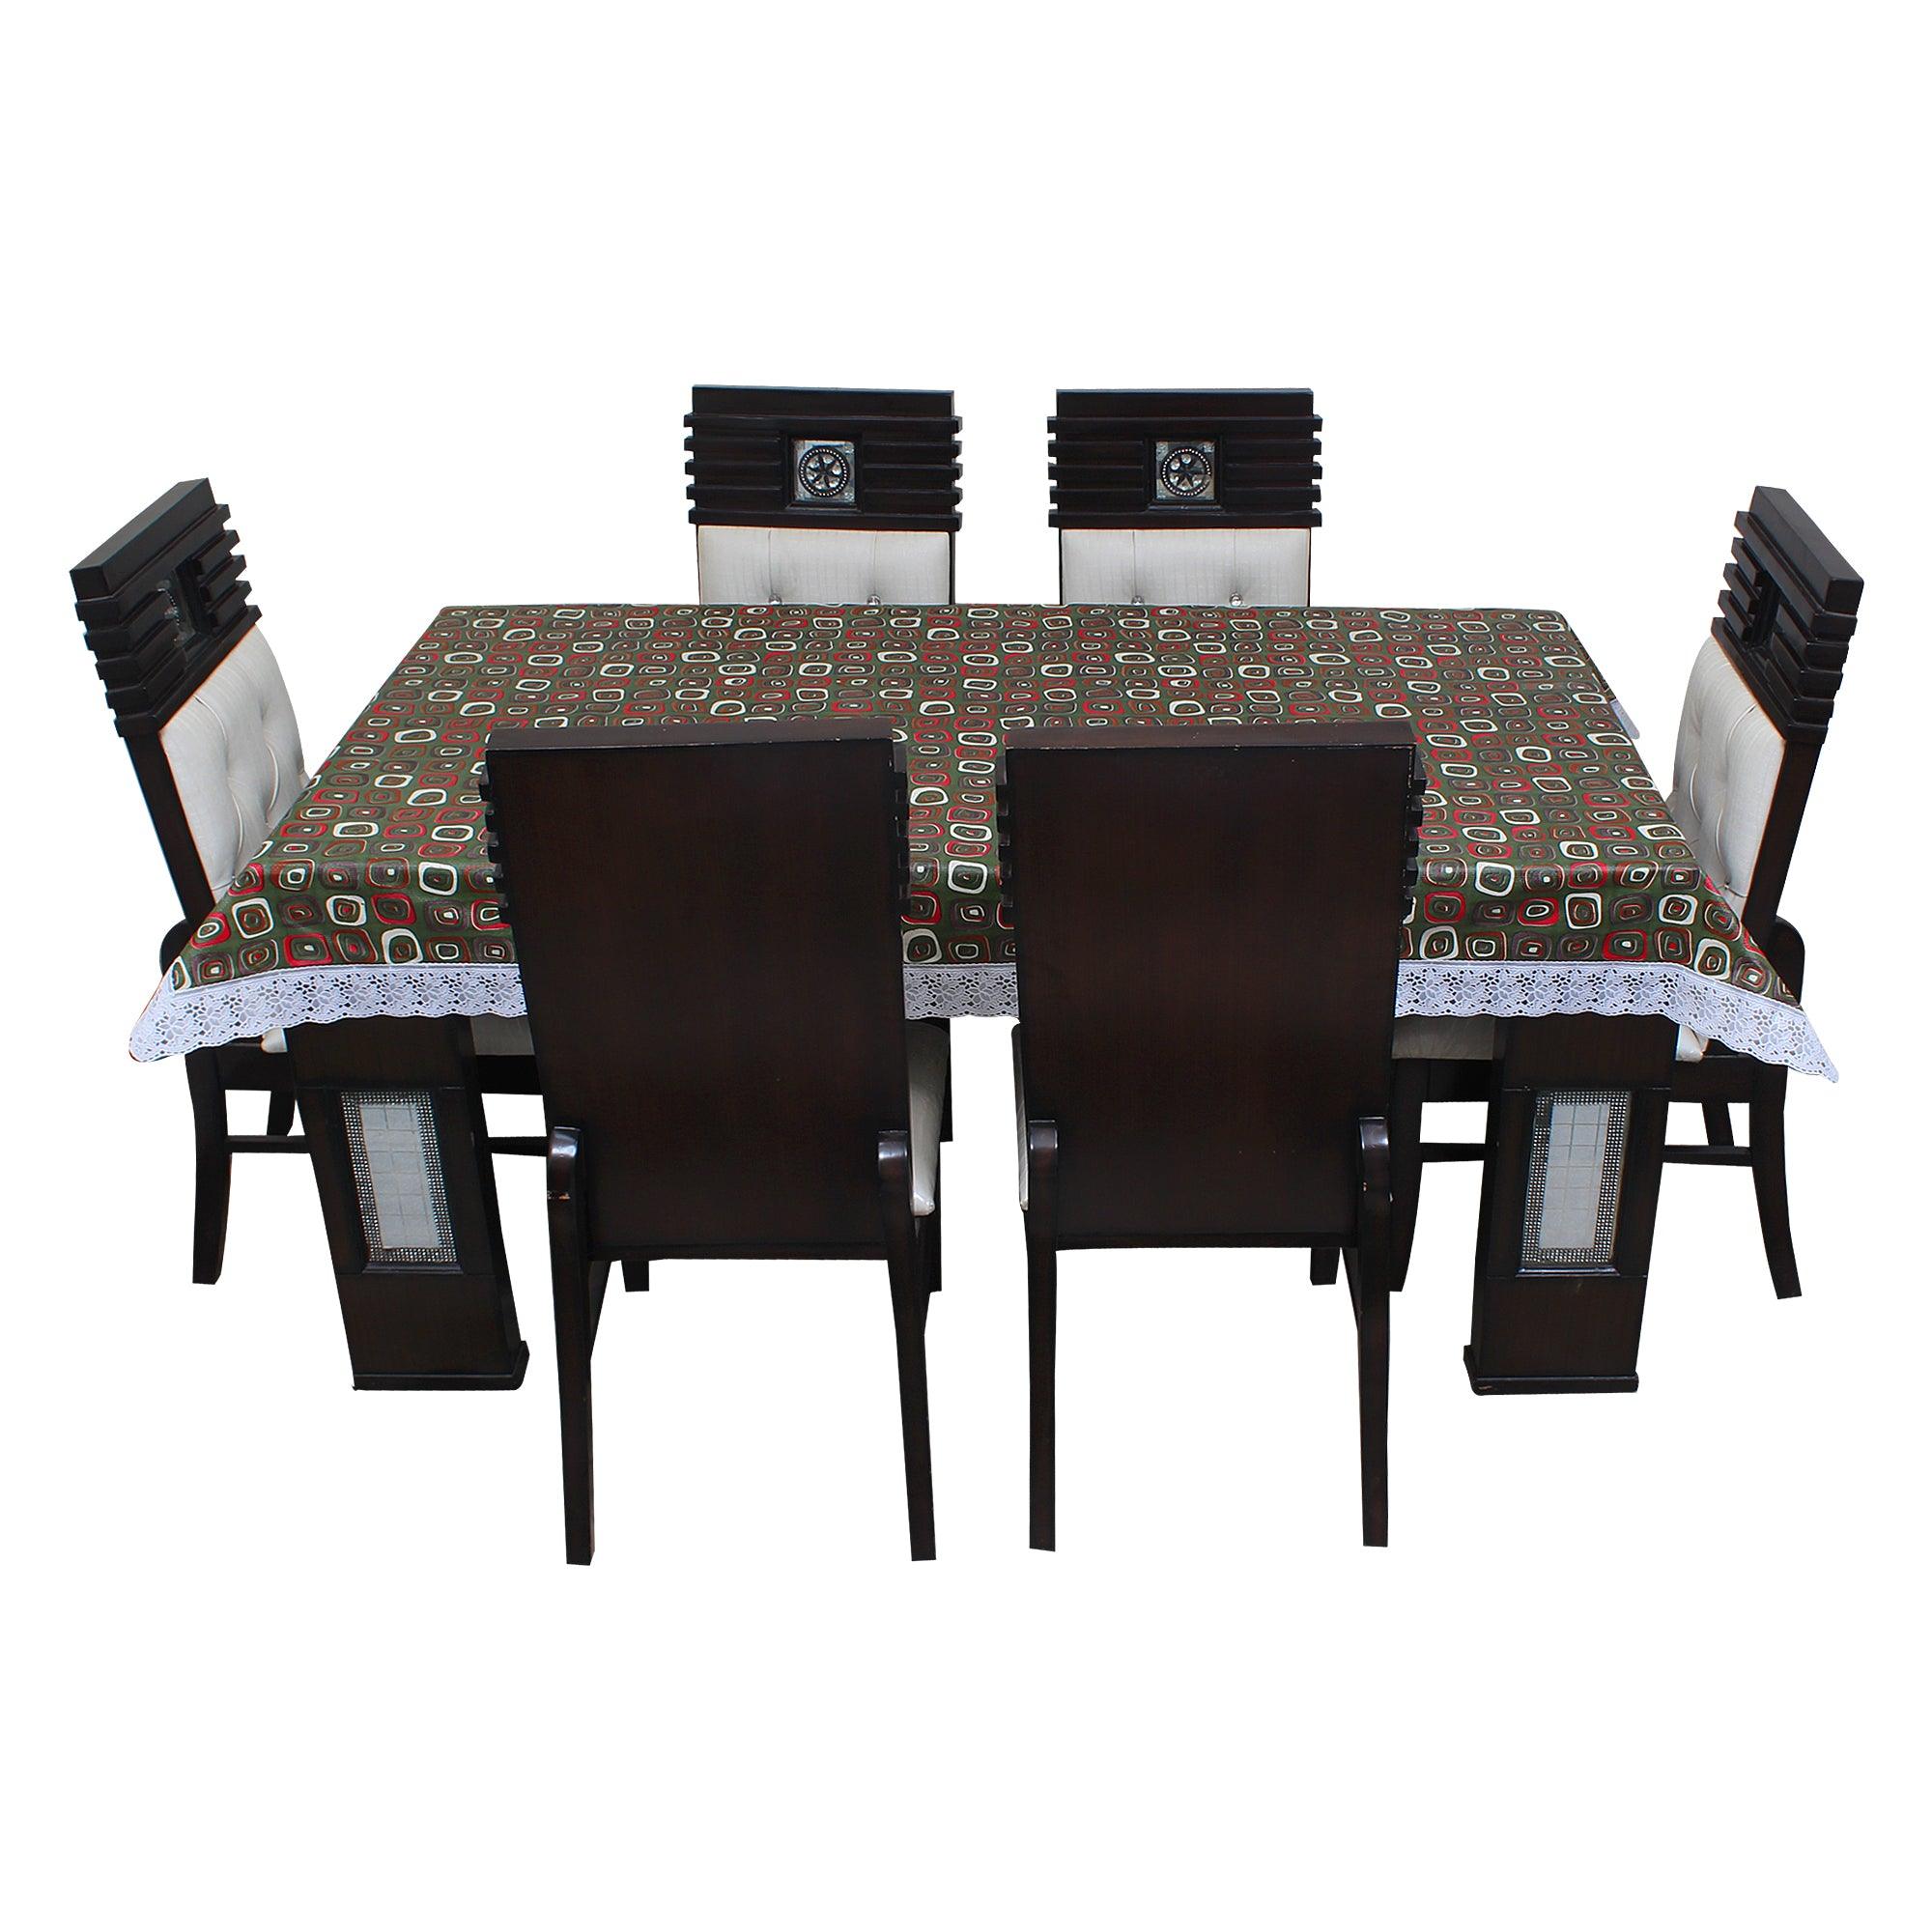 Waterproof and Dustproof Dining Table Cover, SA63 - Dream Care Furnishings Private Limited